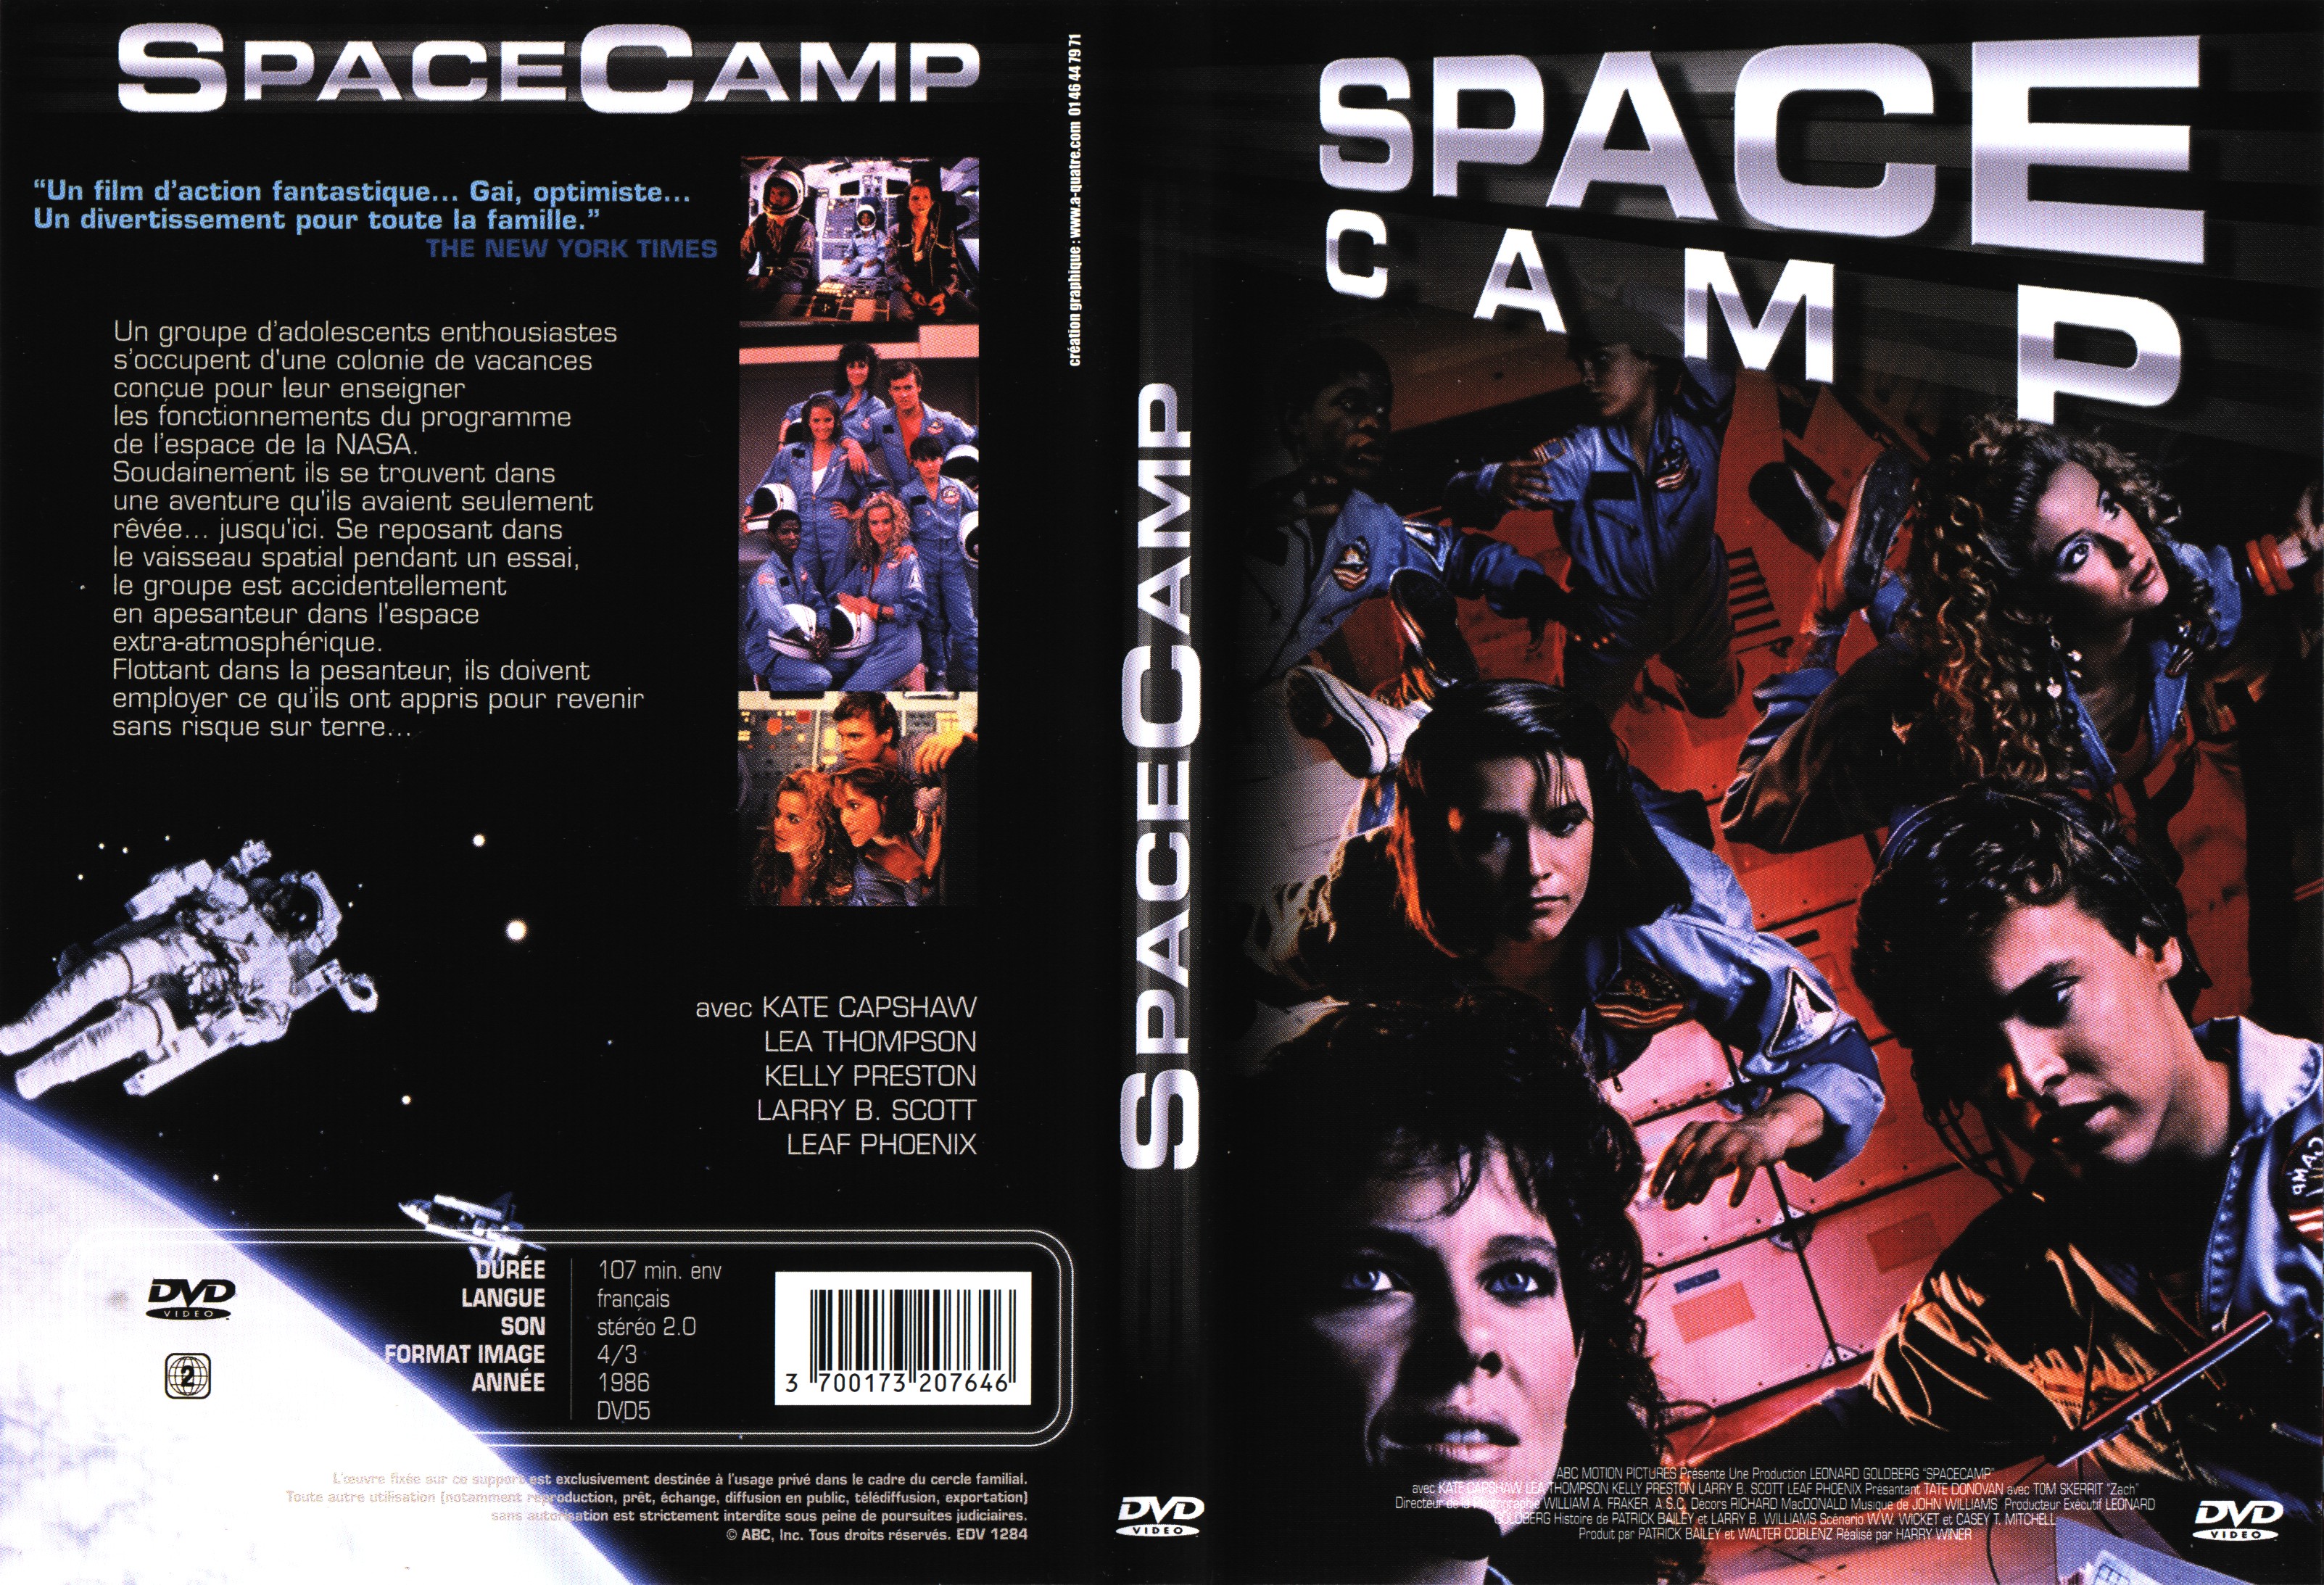 Jaquette DVD Space camp